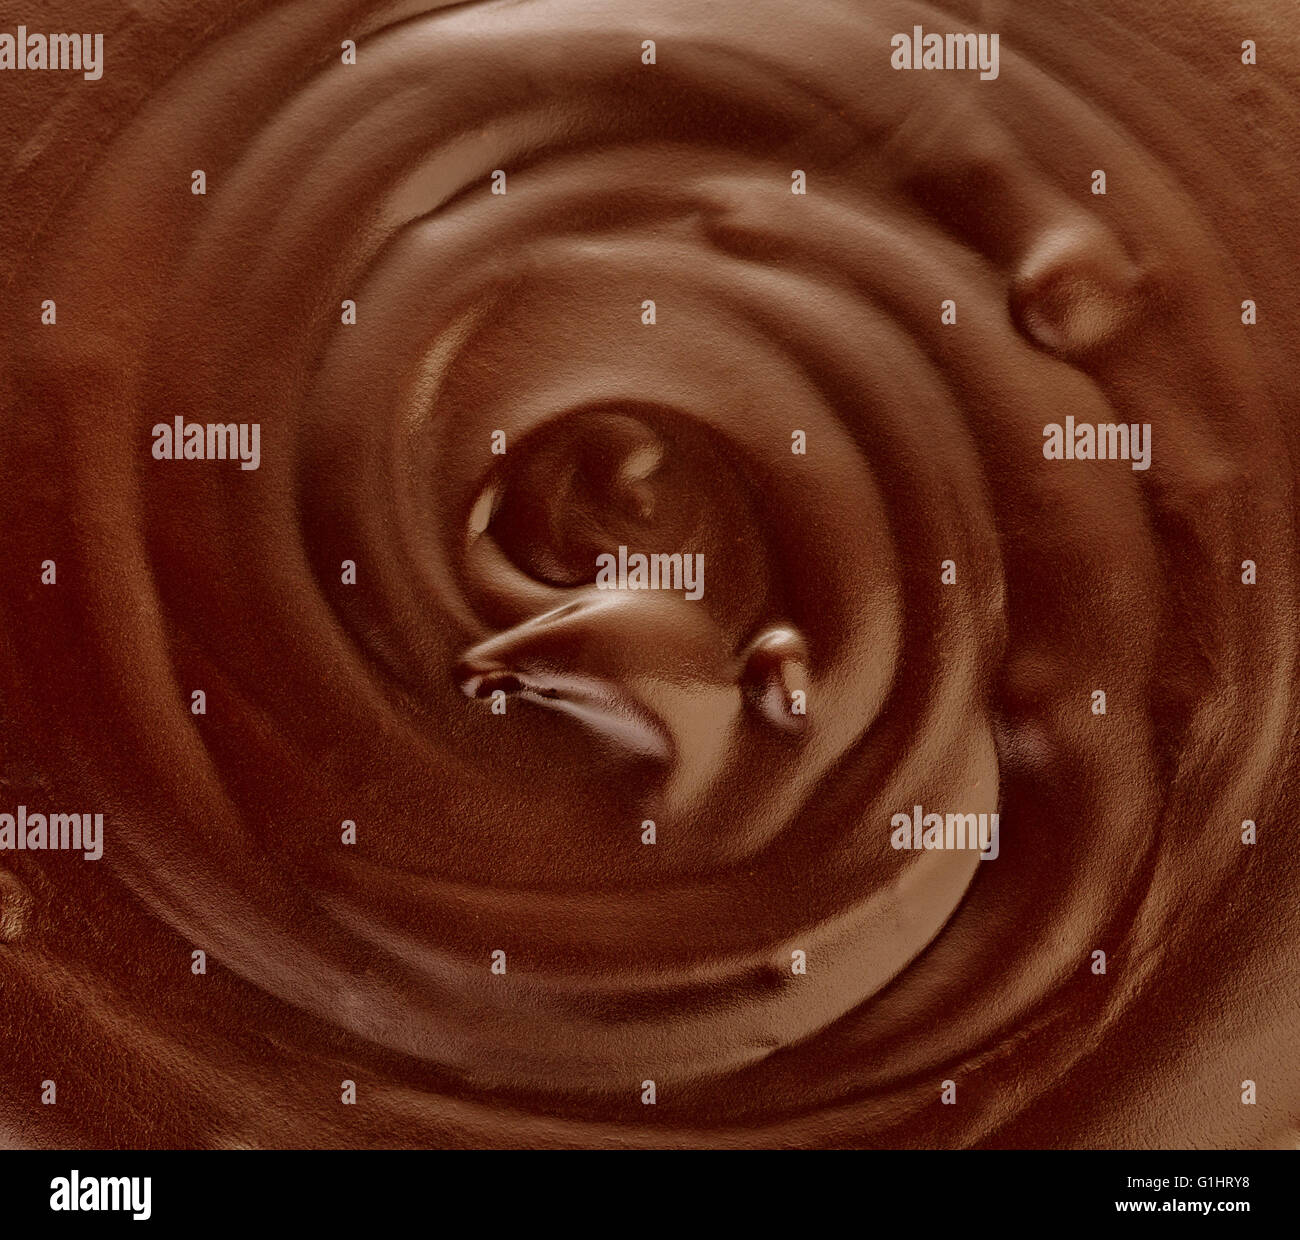 Melted dark chocolate flow, candy or chocolate preparation close-up as a background. Stock Photo